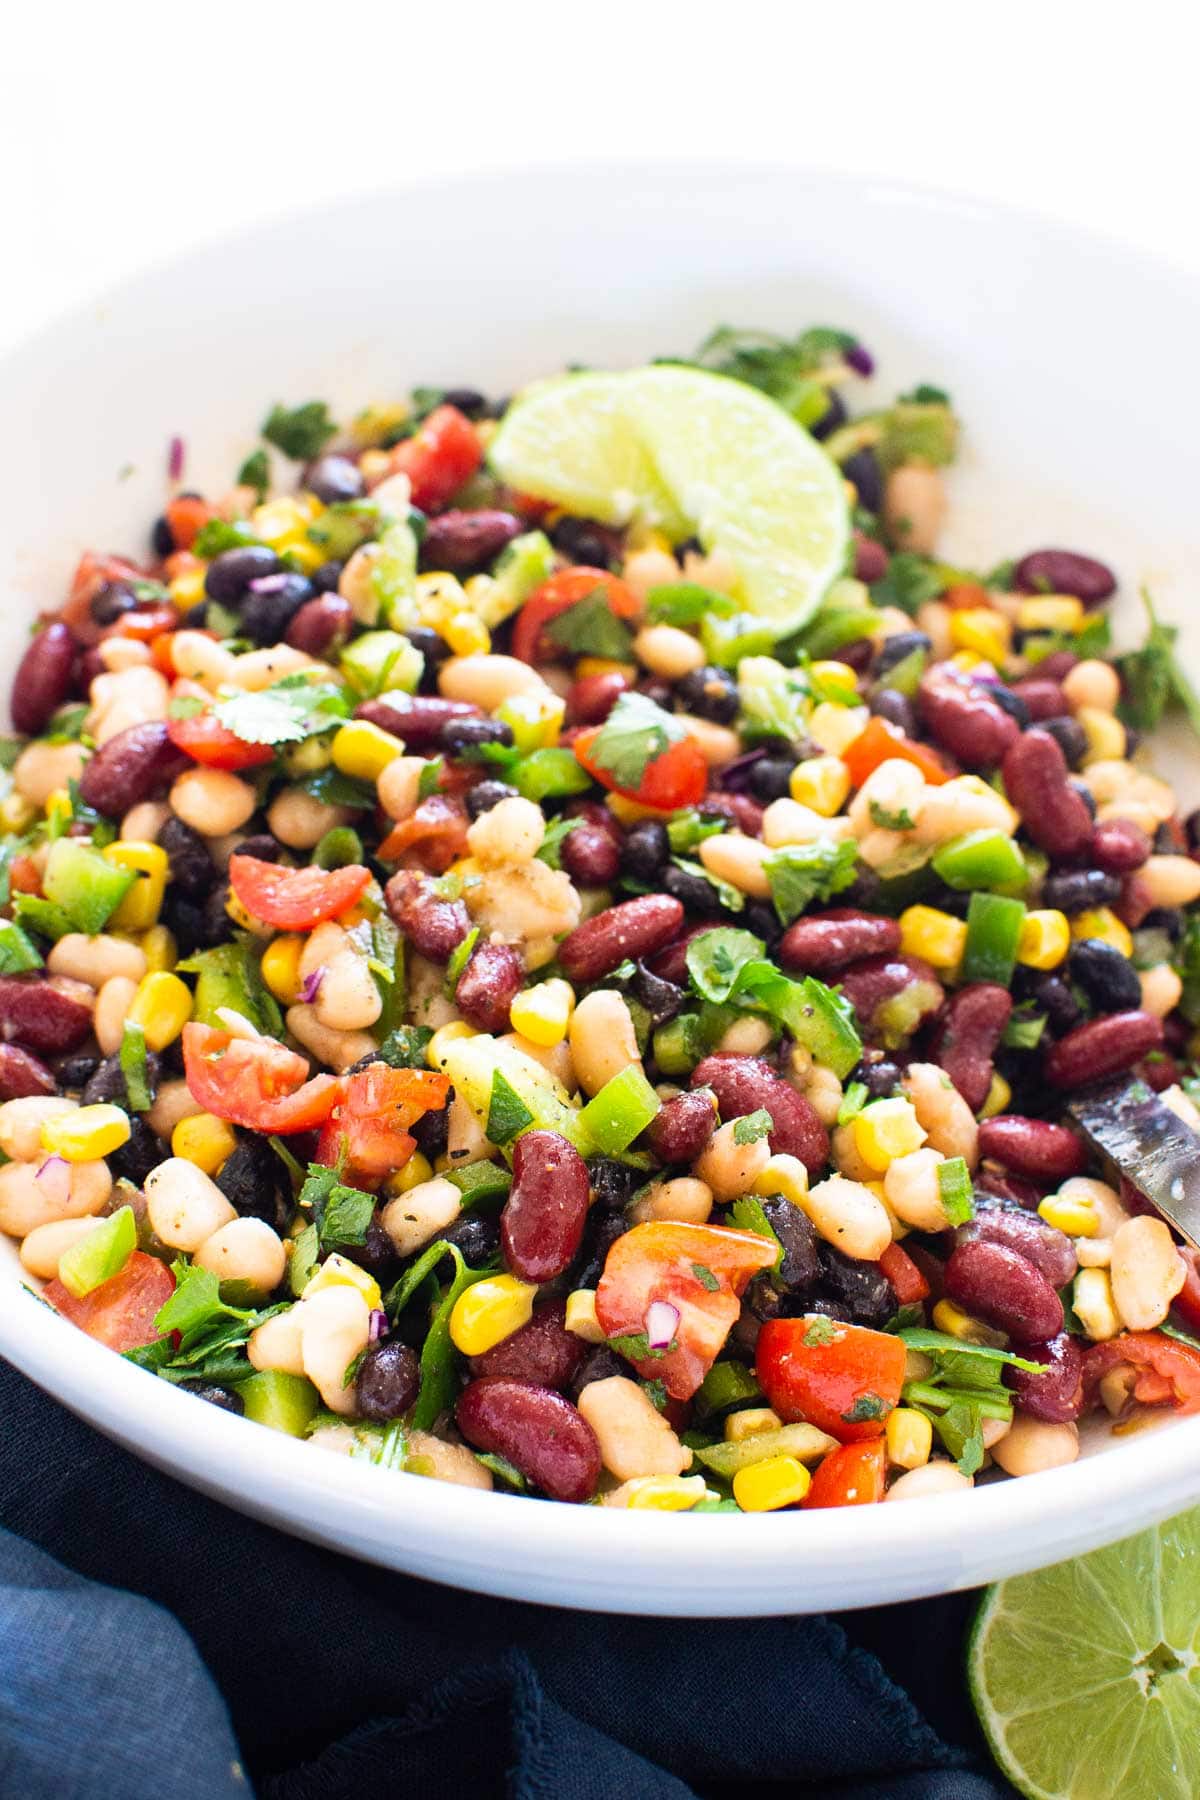 Mexican bean salad with corn, tomato, cilantro and garnished with lime in white bowl.